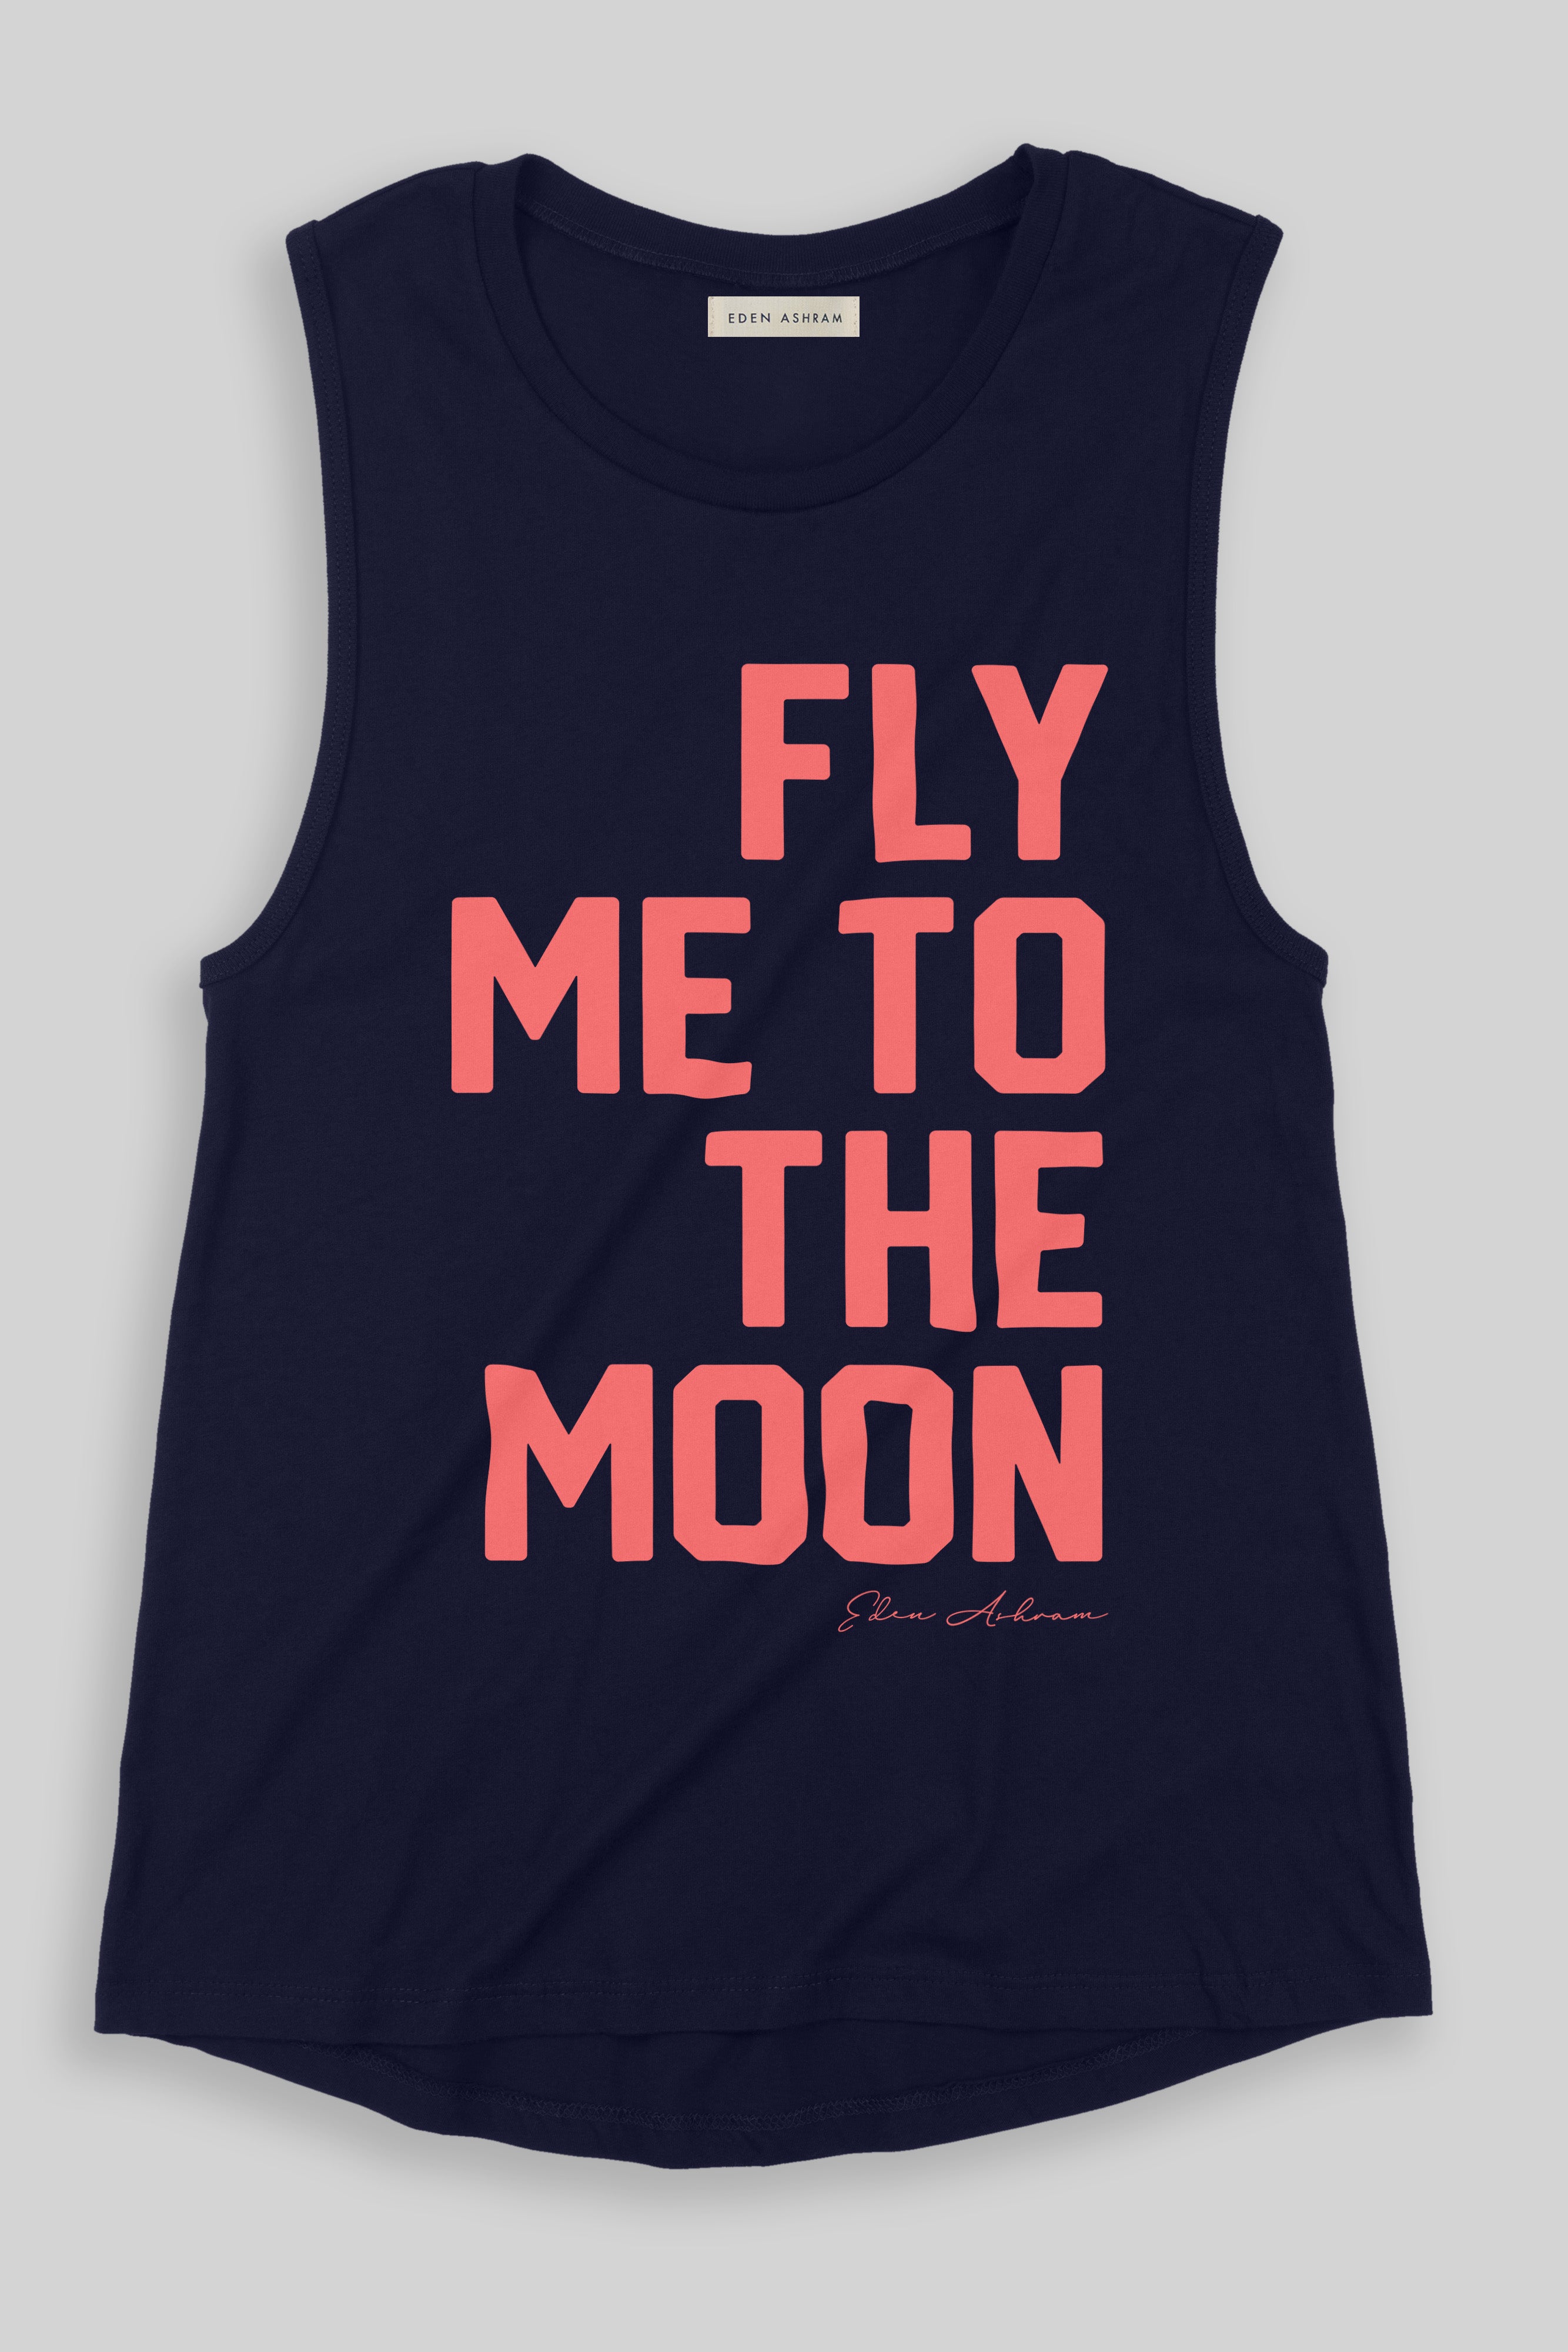 EDEN ASHRAM Fly Me To The Moon Jersey Muscle Tank Navy